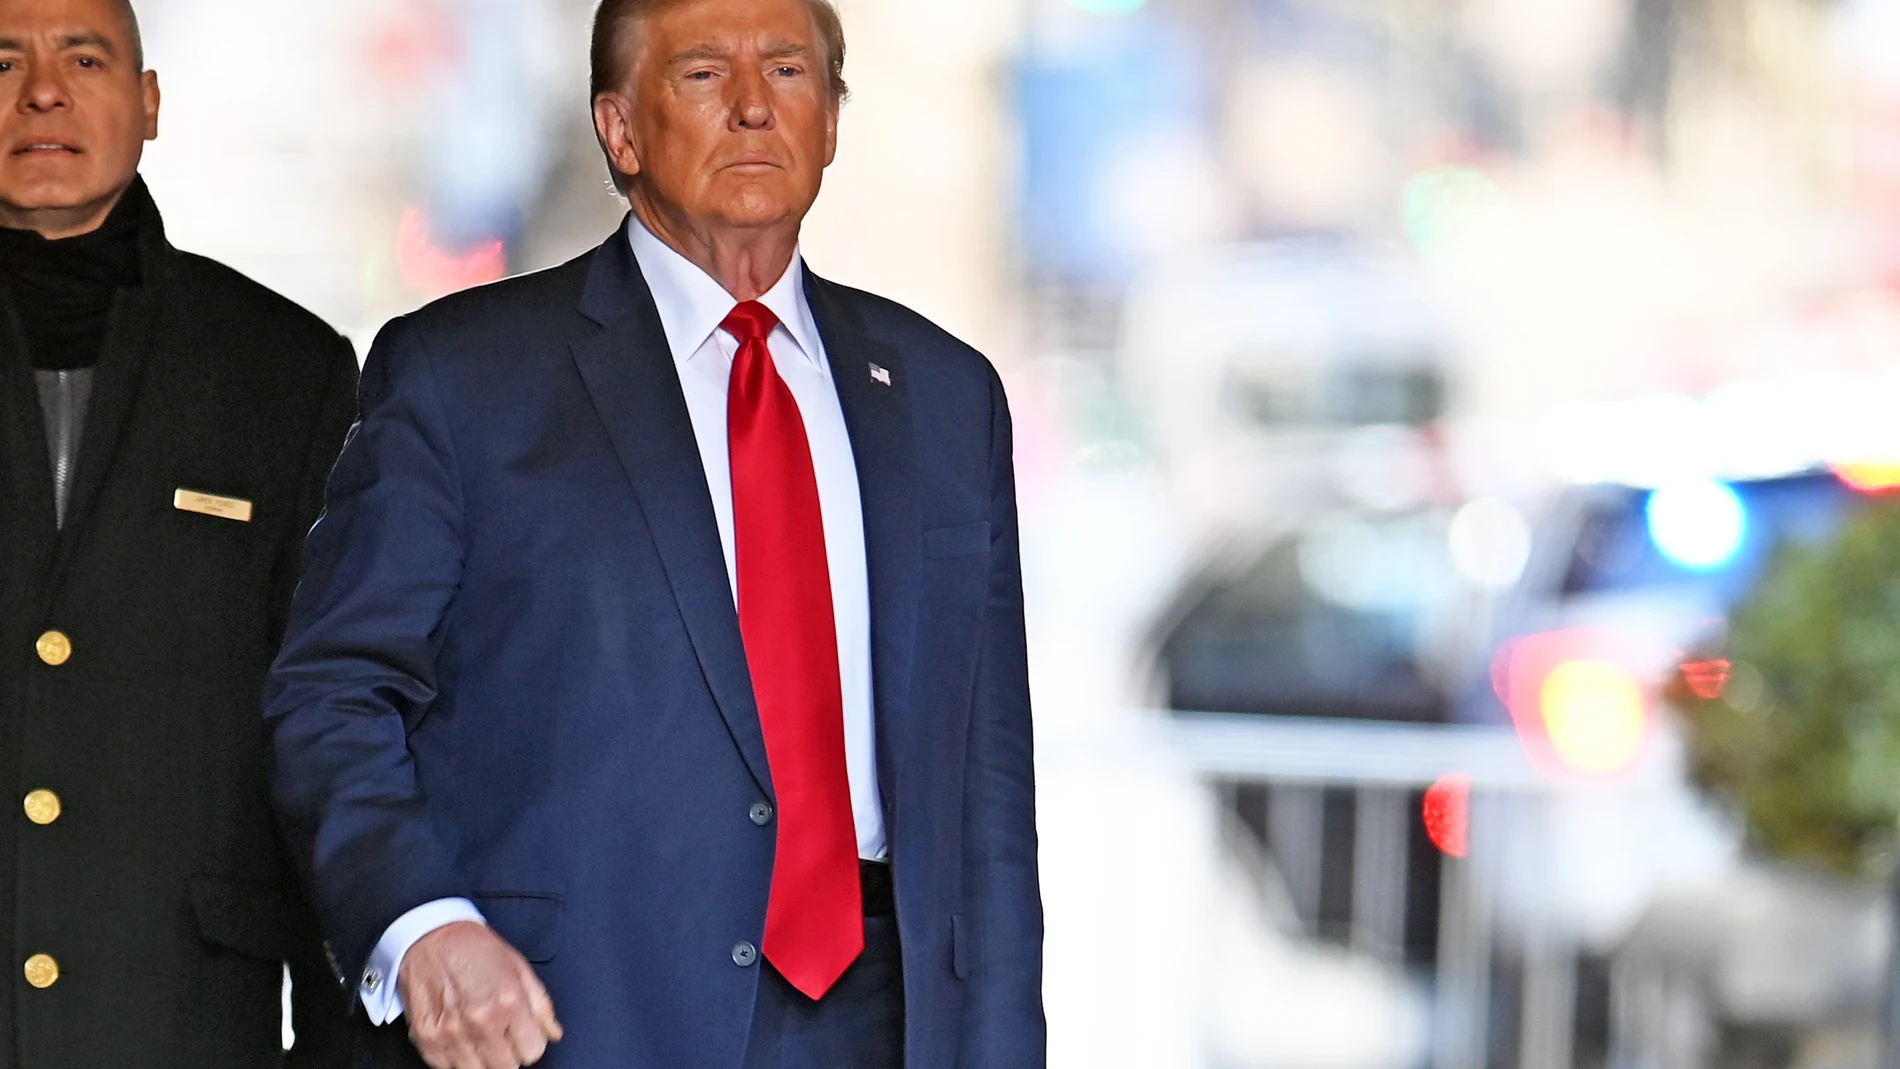 February 15, 2024, New York, New York, USA: Former President Donald Trump leaving Trump Tower on Fifth Avenue for the ongoing hush money criminal case in lower Manhattan. (PHOTO: Andrea RENAULT/Zuma Press) 15/02/2024